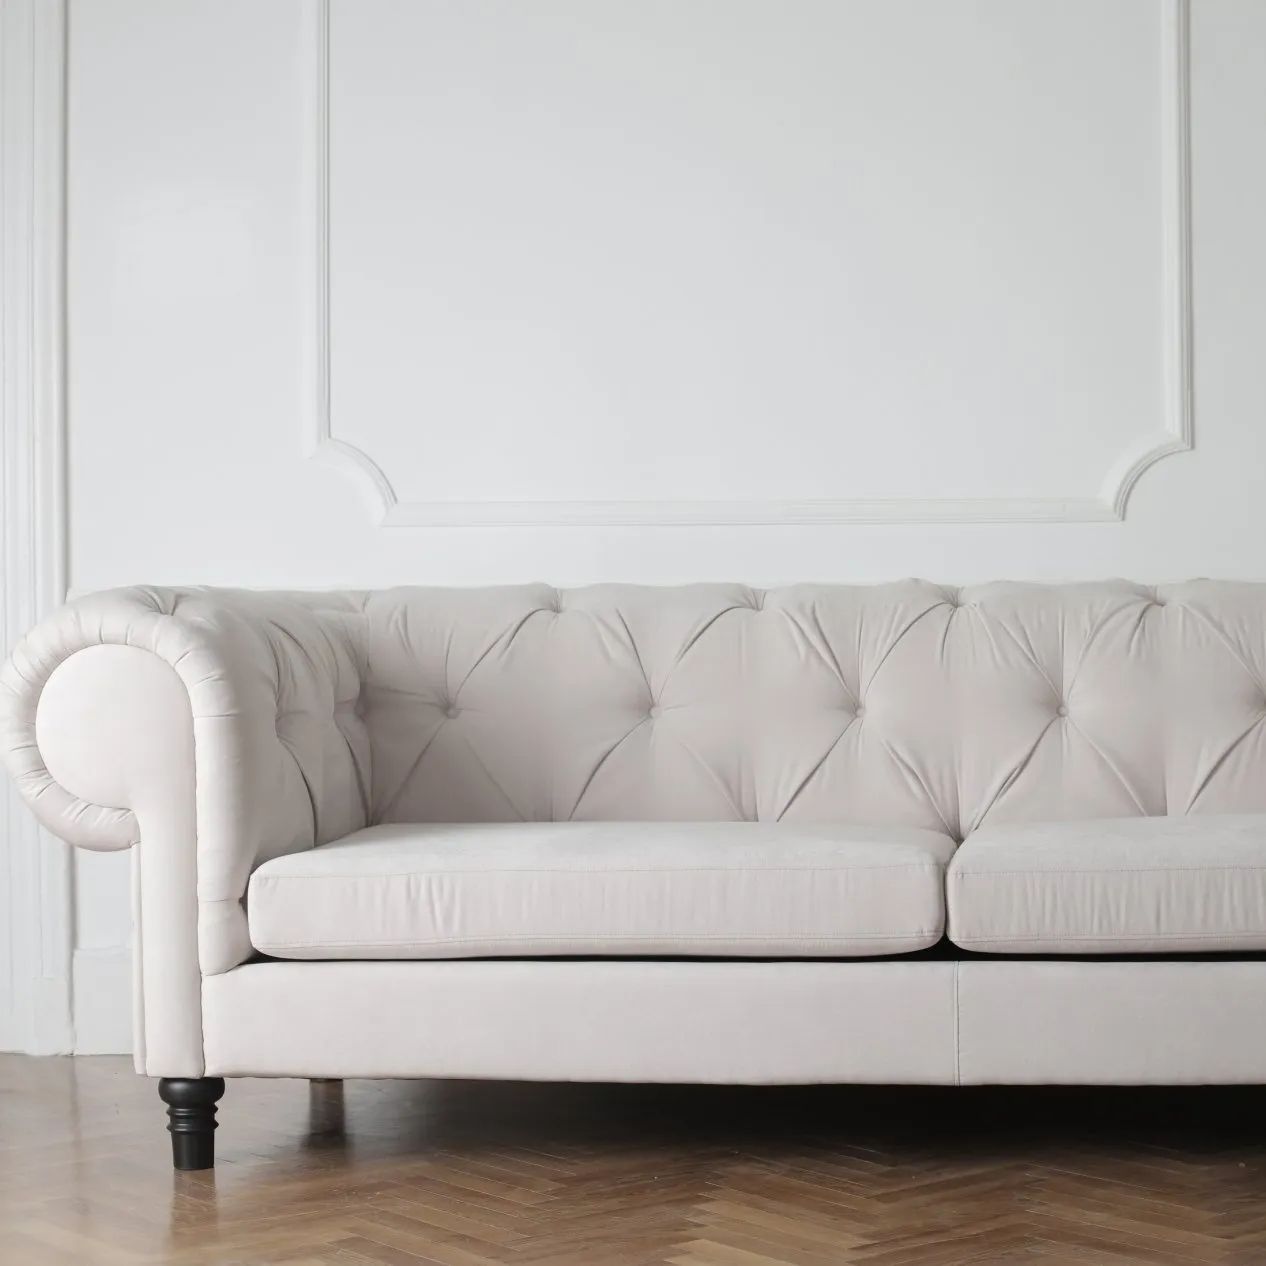 a cream colored, upholstered couch